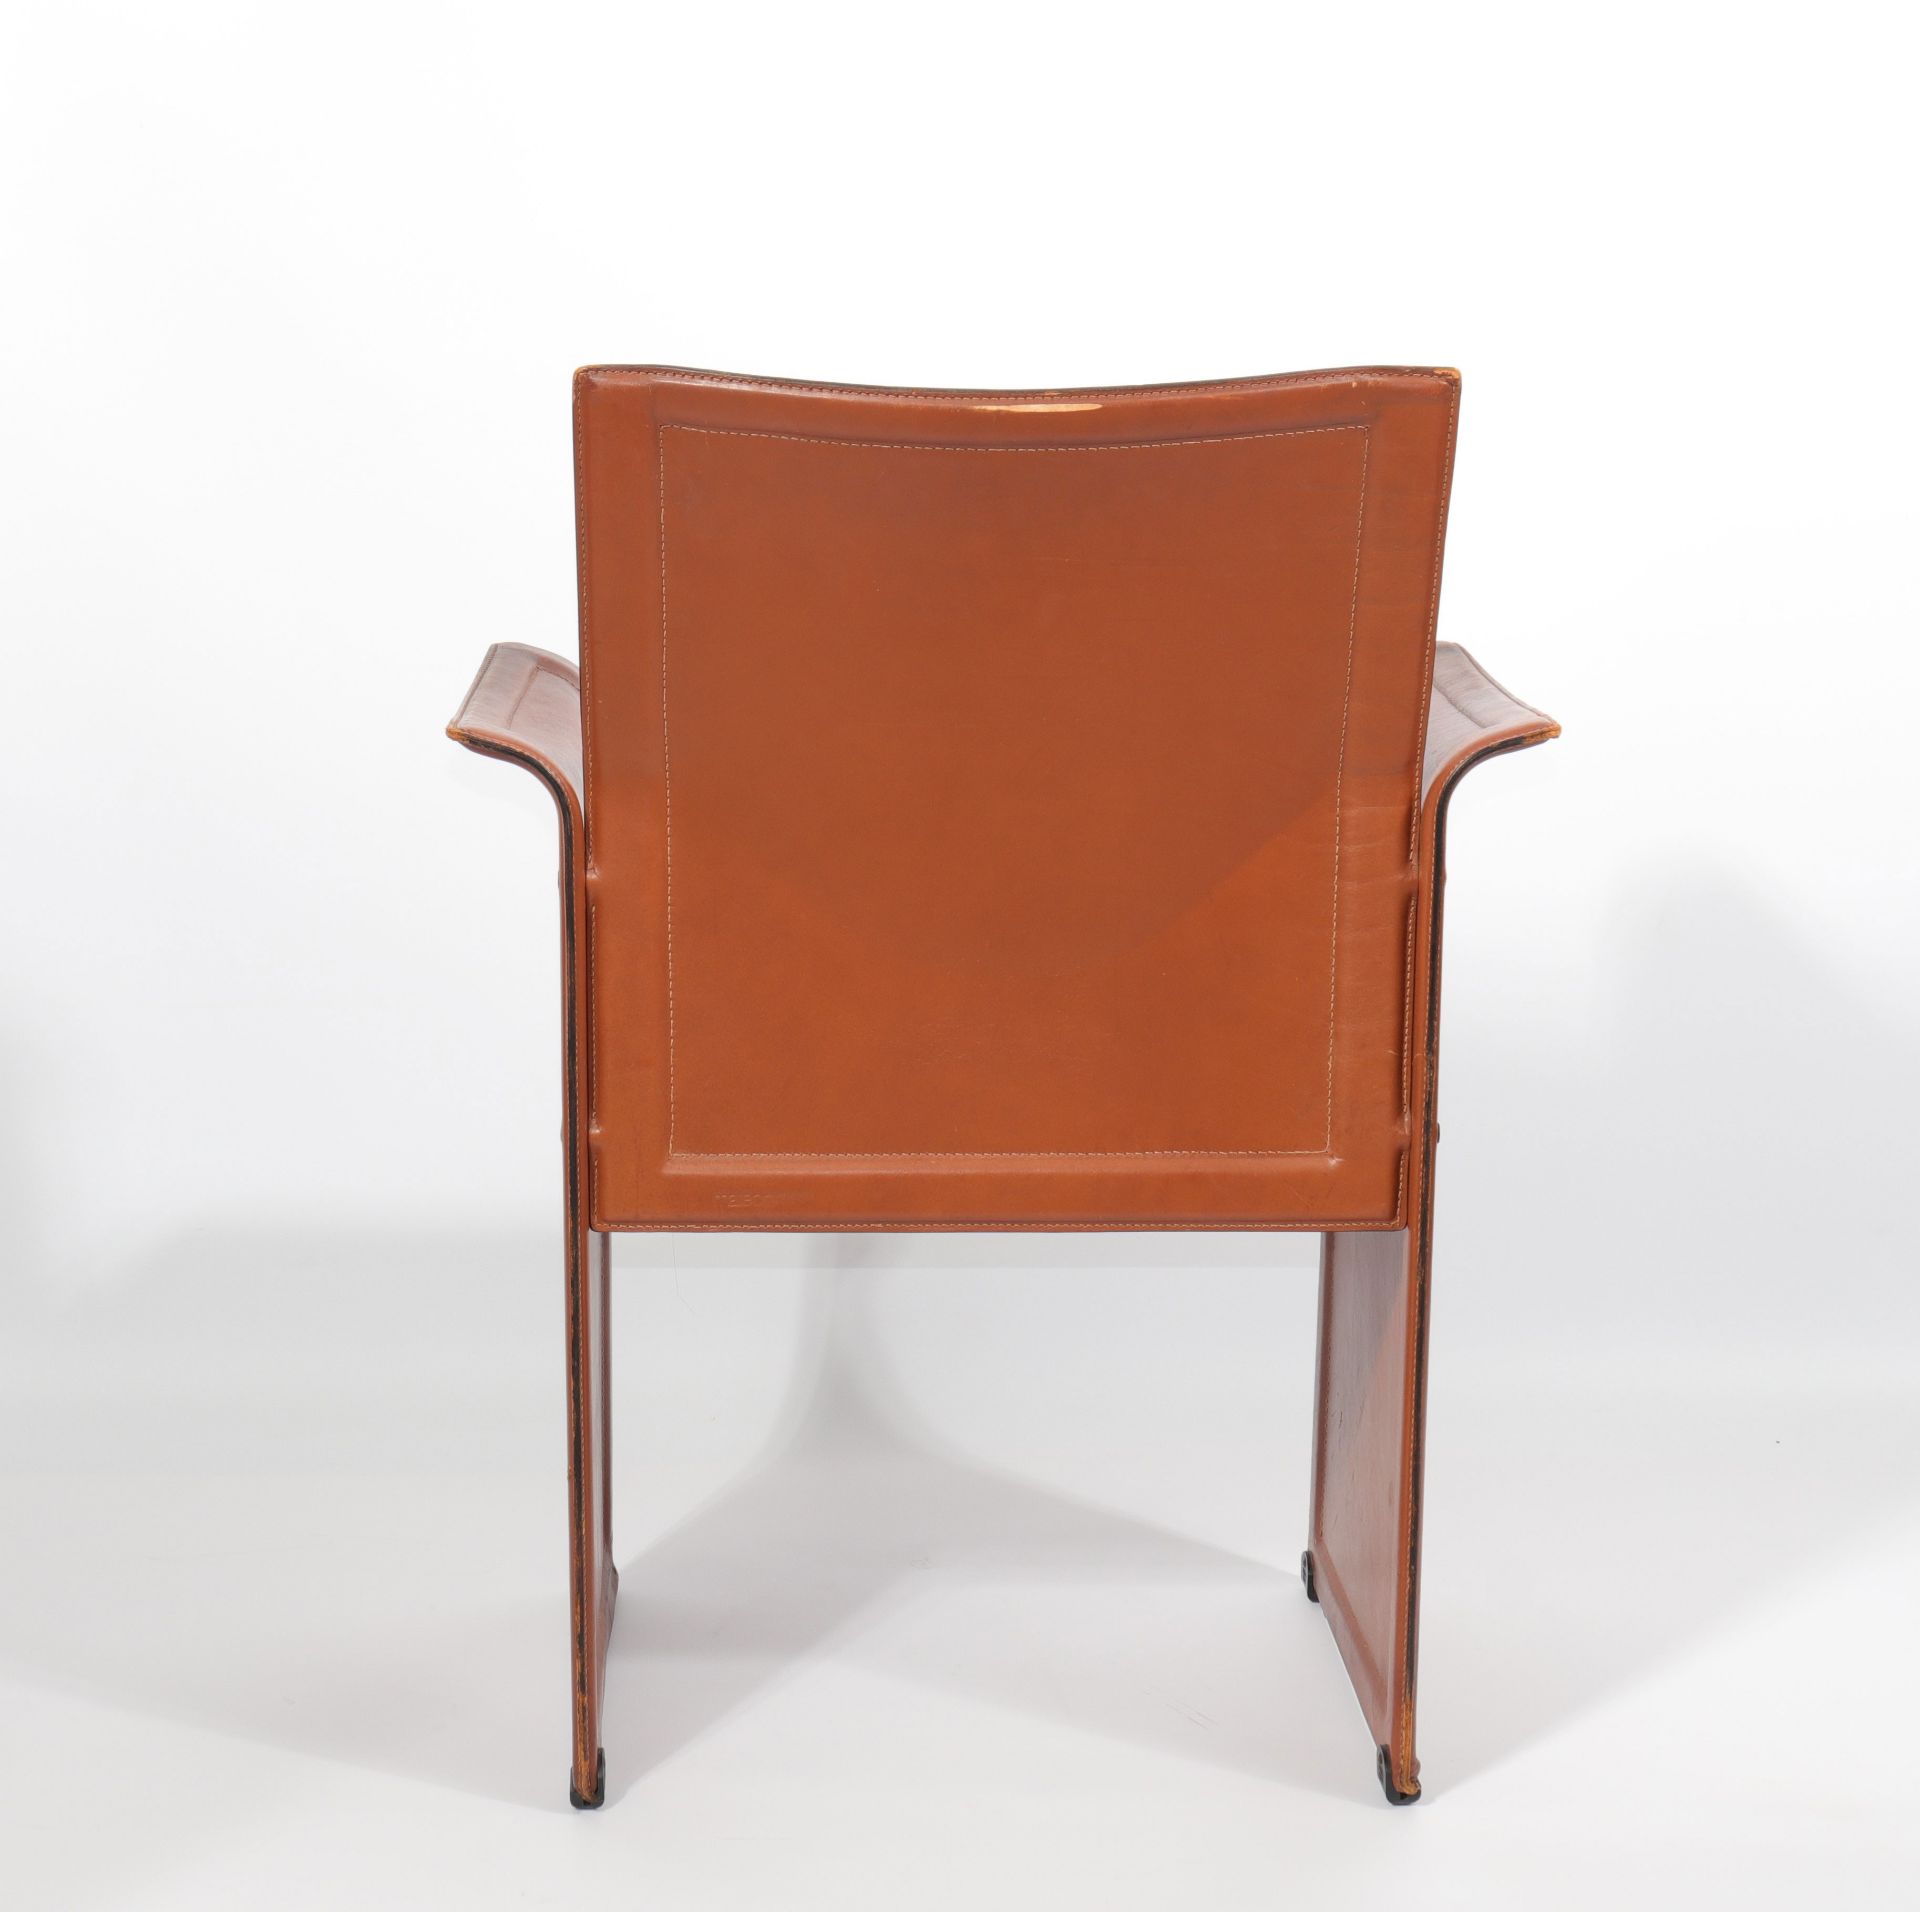 Suite of 12 Matteo Grassi chairs in brown patina leather - Image 2 of 4